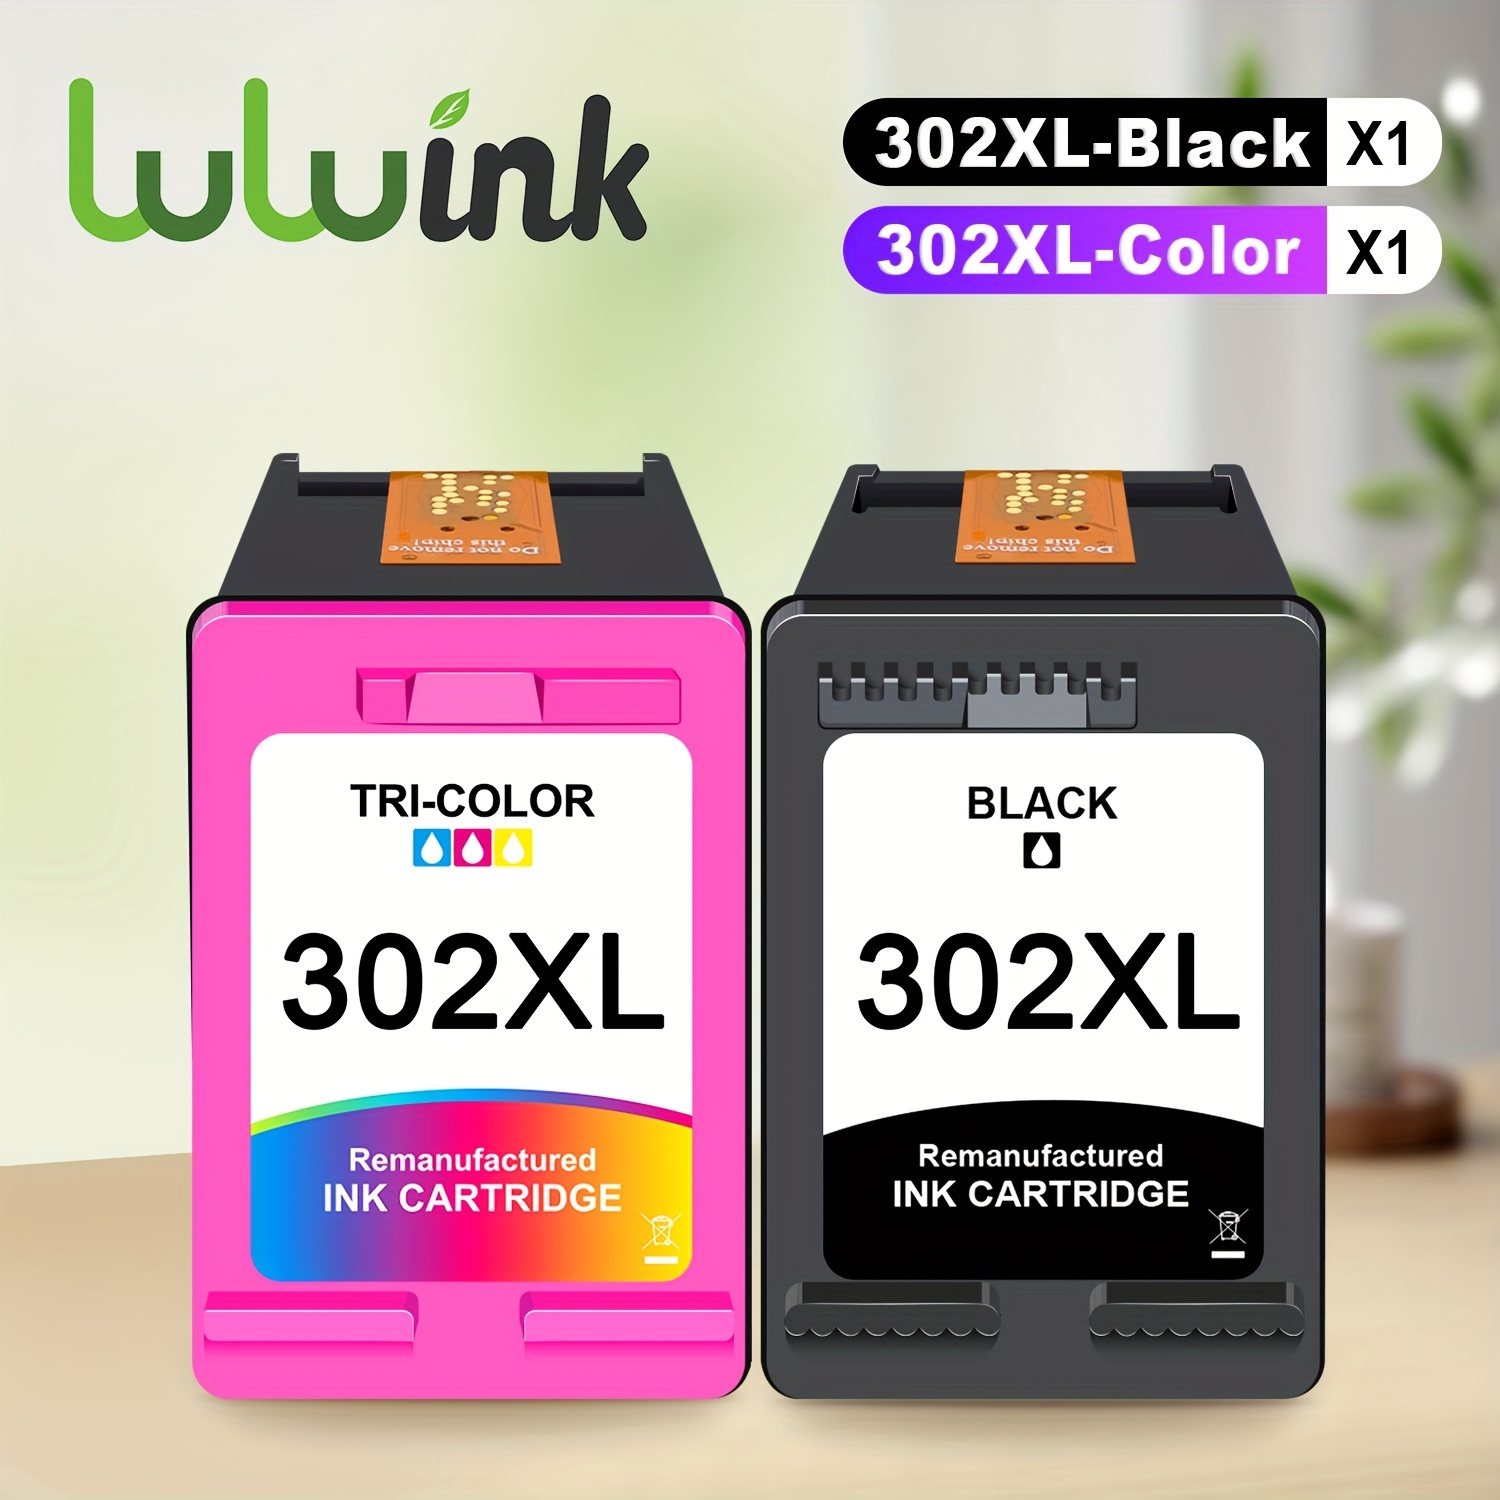 

High-yield 302xl Remanufactured Ink Cartridges, Compatible With Hp Deskjet & Envy Series - Black & Tri-color, 20ml/19ml Capacity